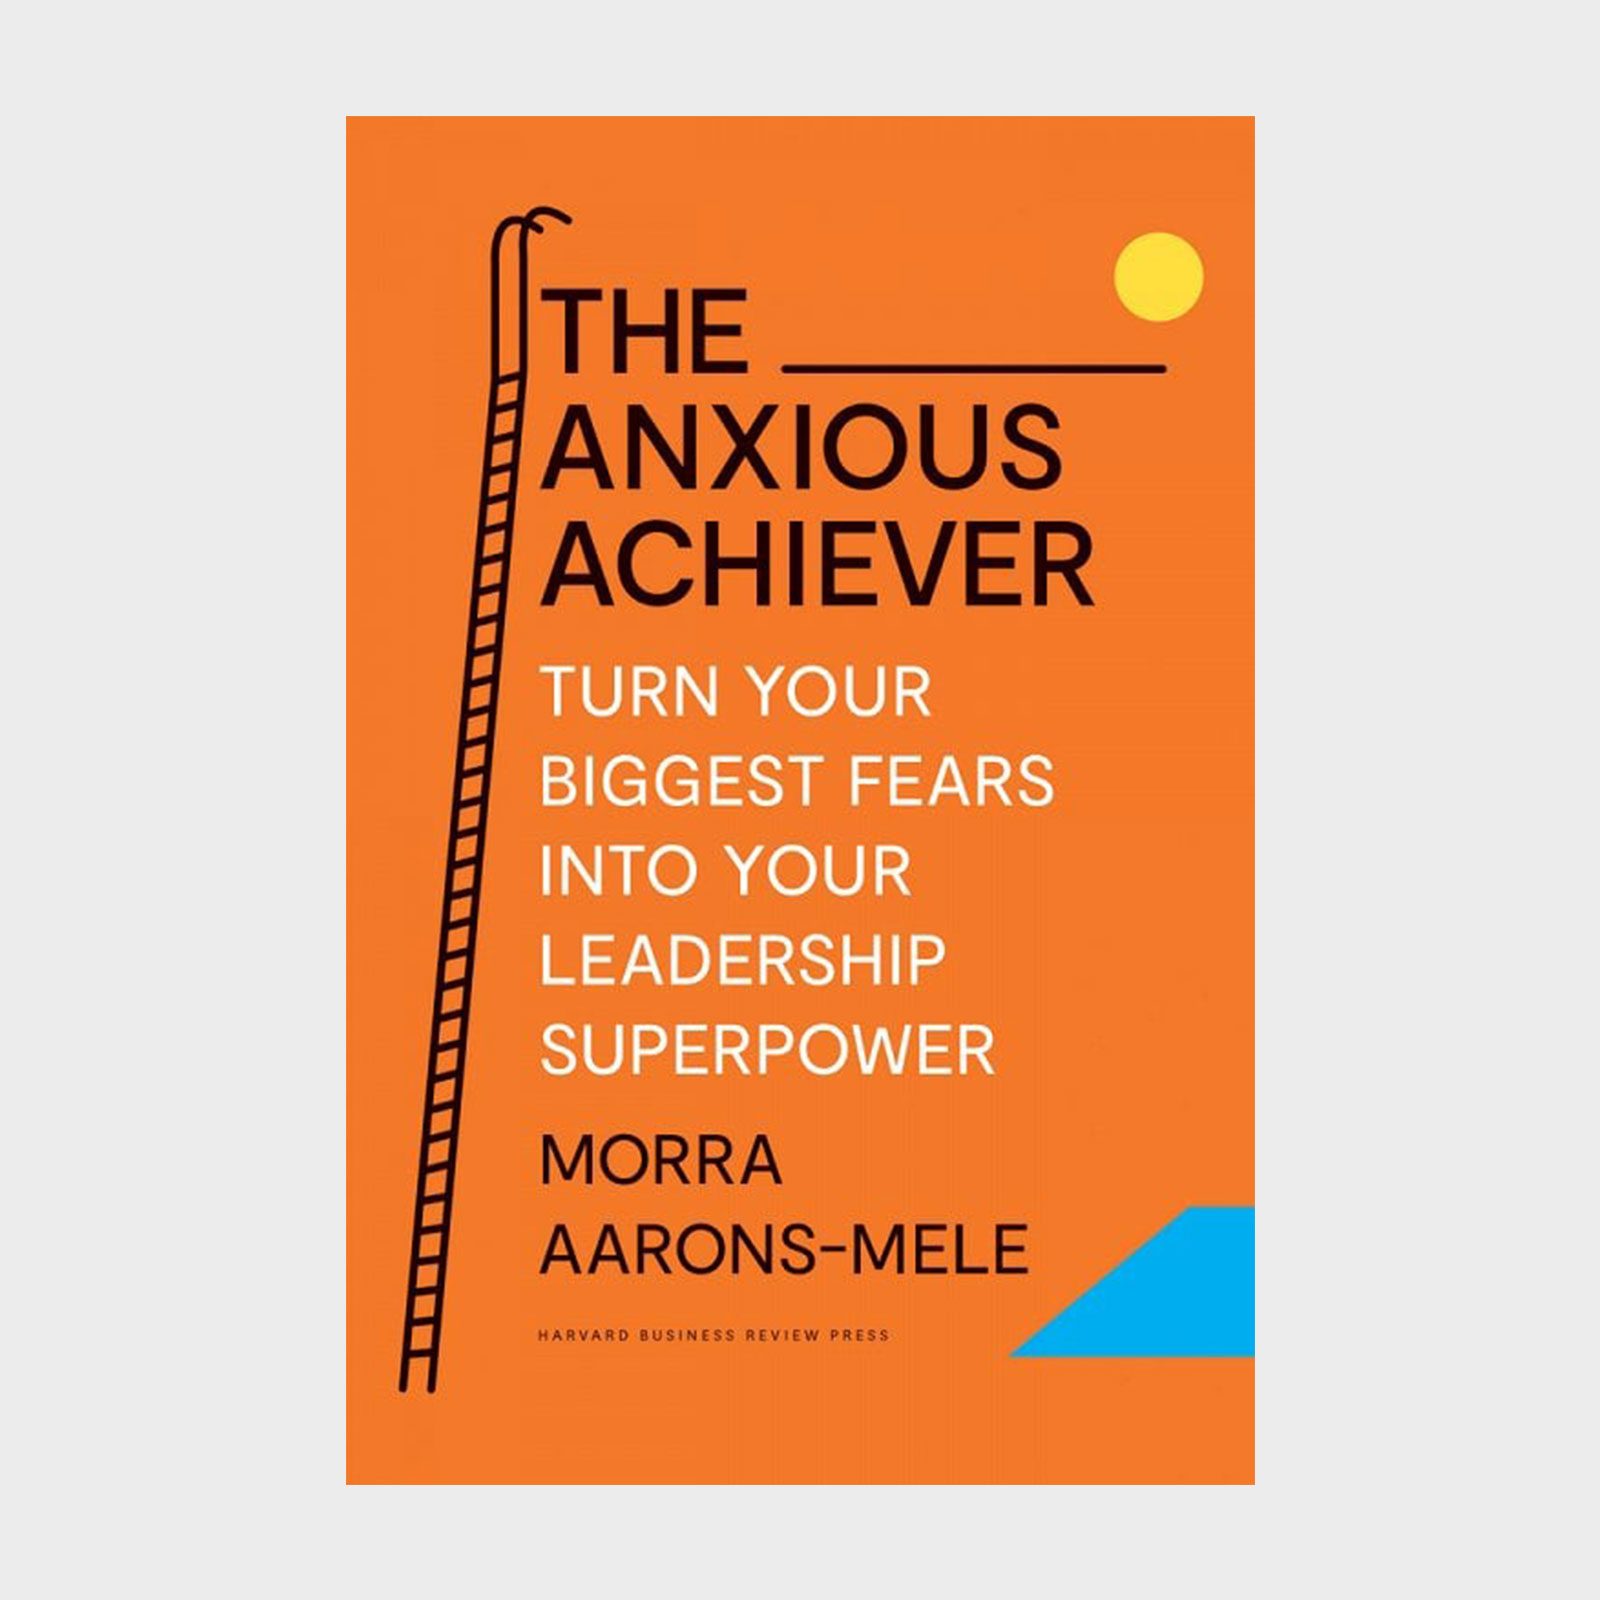 <p>Morra Aarons-Mele's 2023 release <a href="https://bookshop.org/p/books/the-anxious-achiever-turn-your-biggest-fears-into-your-leadership-superpower-morra-aarons-mele/18627381?ean=9781647822538" rel="noopener"><em>The Anxious Achiever</em></a> strives to strip the stigma surrounding anxiety, normalizing it and teaching high-achievers how to transform it into a superpower in the workplace. If you've struggled to understand your own mental health, how to clear your mind or how to turn stress and worry into a source of strength, then this book is for you.</p> <p class="listicle-page__cta-button-shop"><a class="shop-btn" href="https://bookshop.org/p/books/the-anxious-achiever-turn-your-biggest-fears-into-your-leadership-superpower-morra-aarons-mele/18627381?ean=9781647822538">Shop Now</a></p>